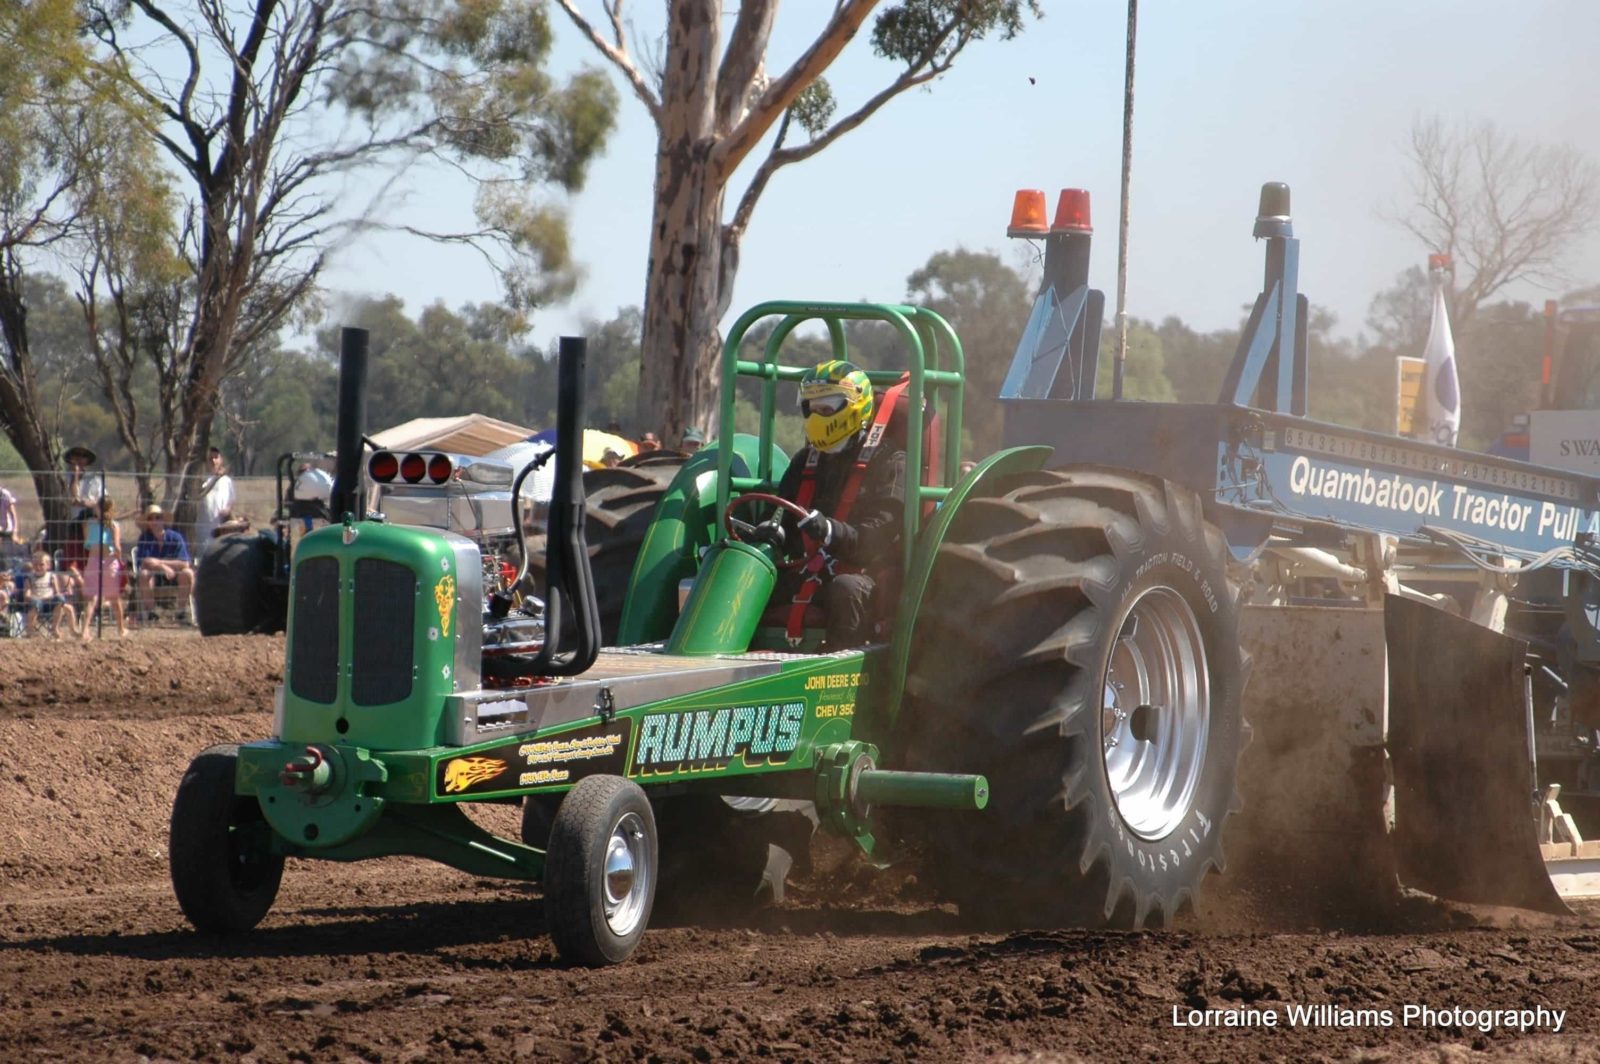 One of the many tractors at the tractor pull